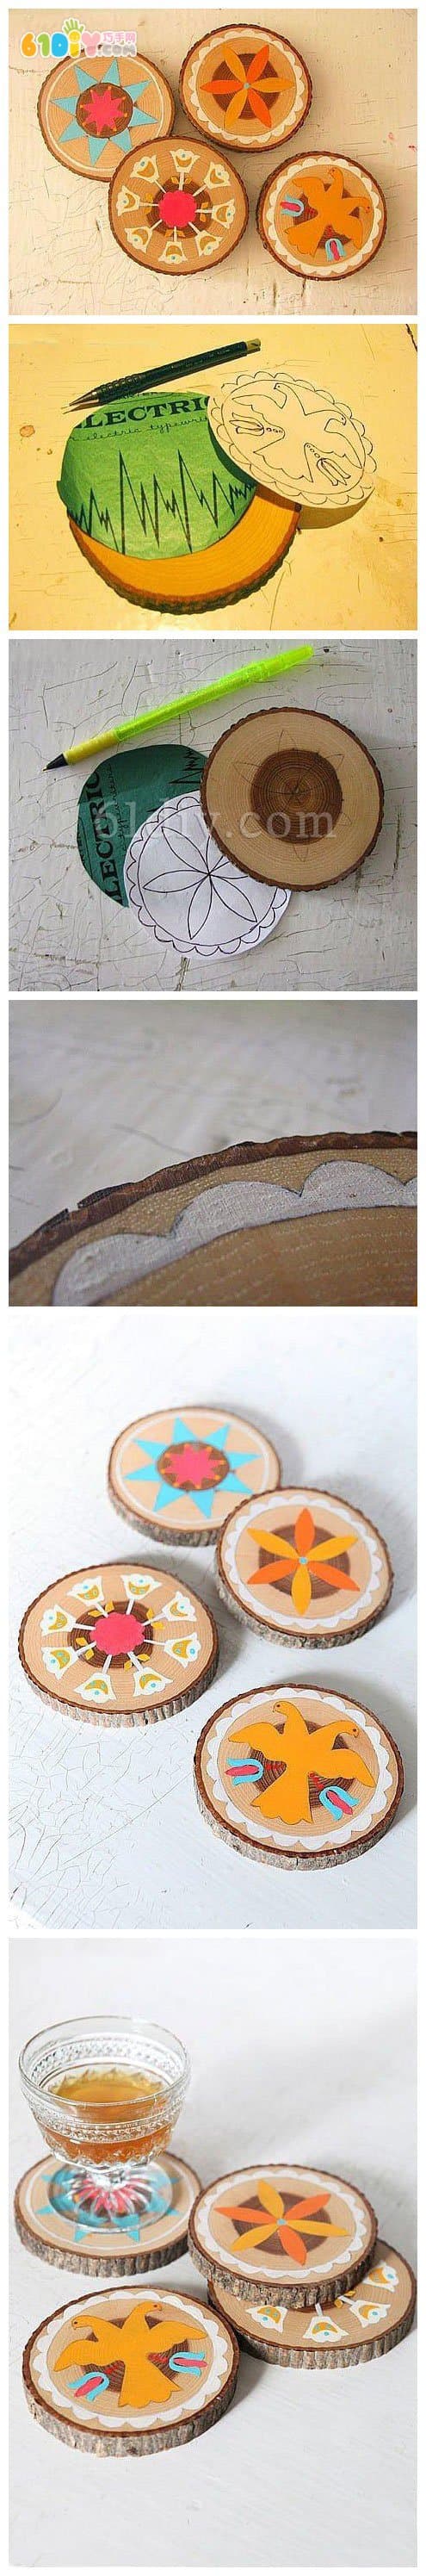 Unique wood hand-painted coasters